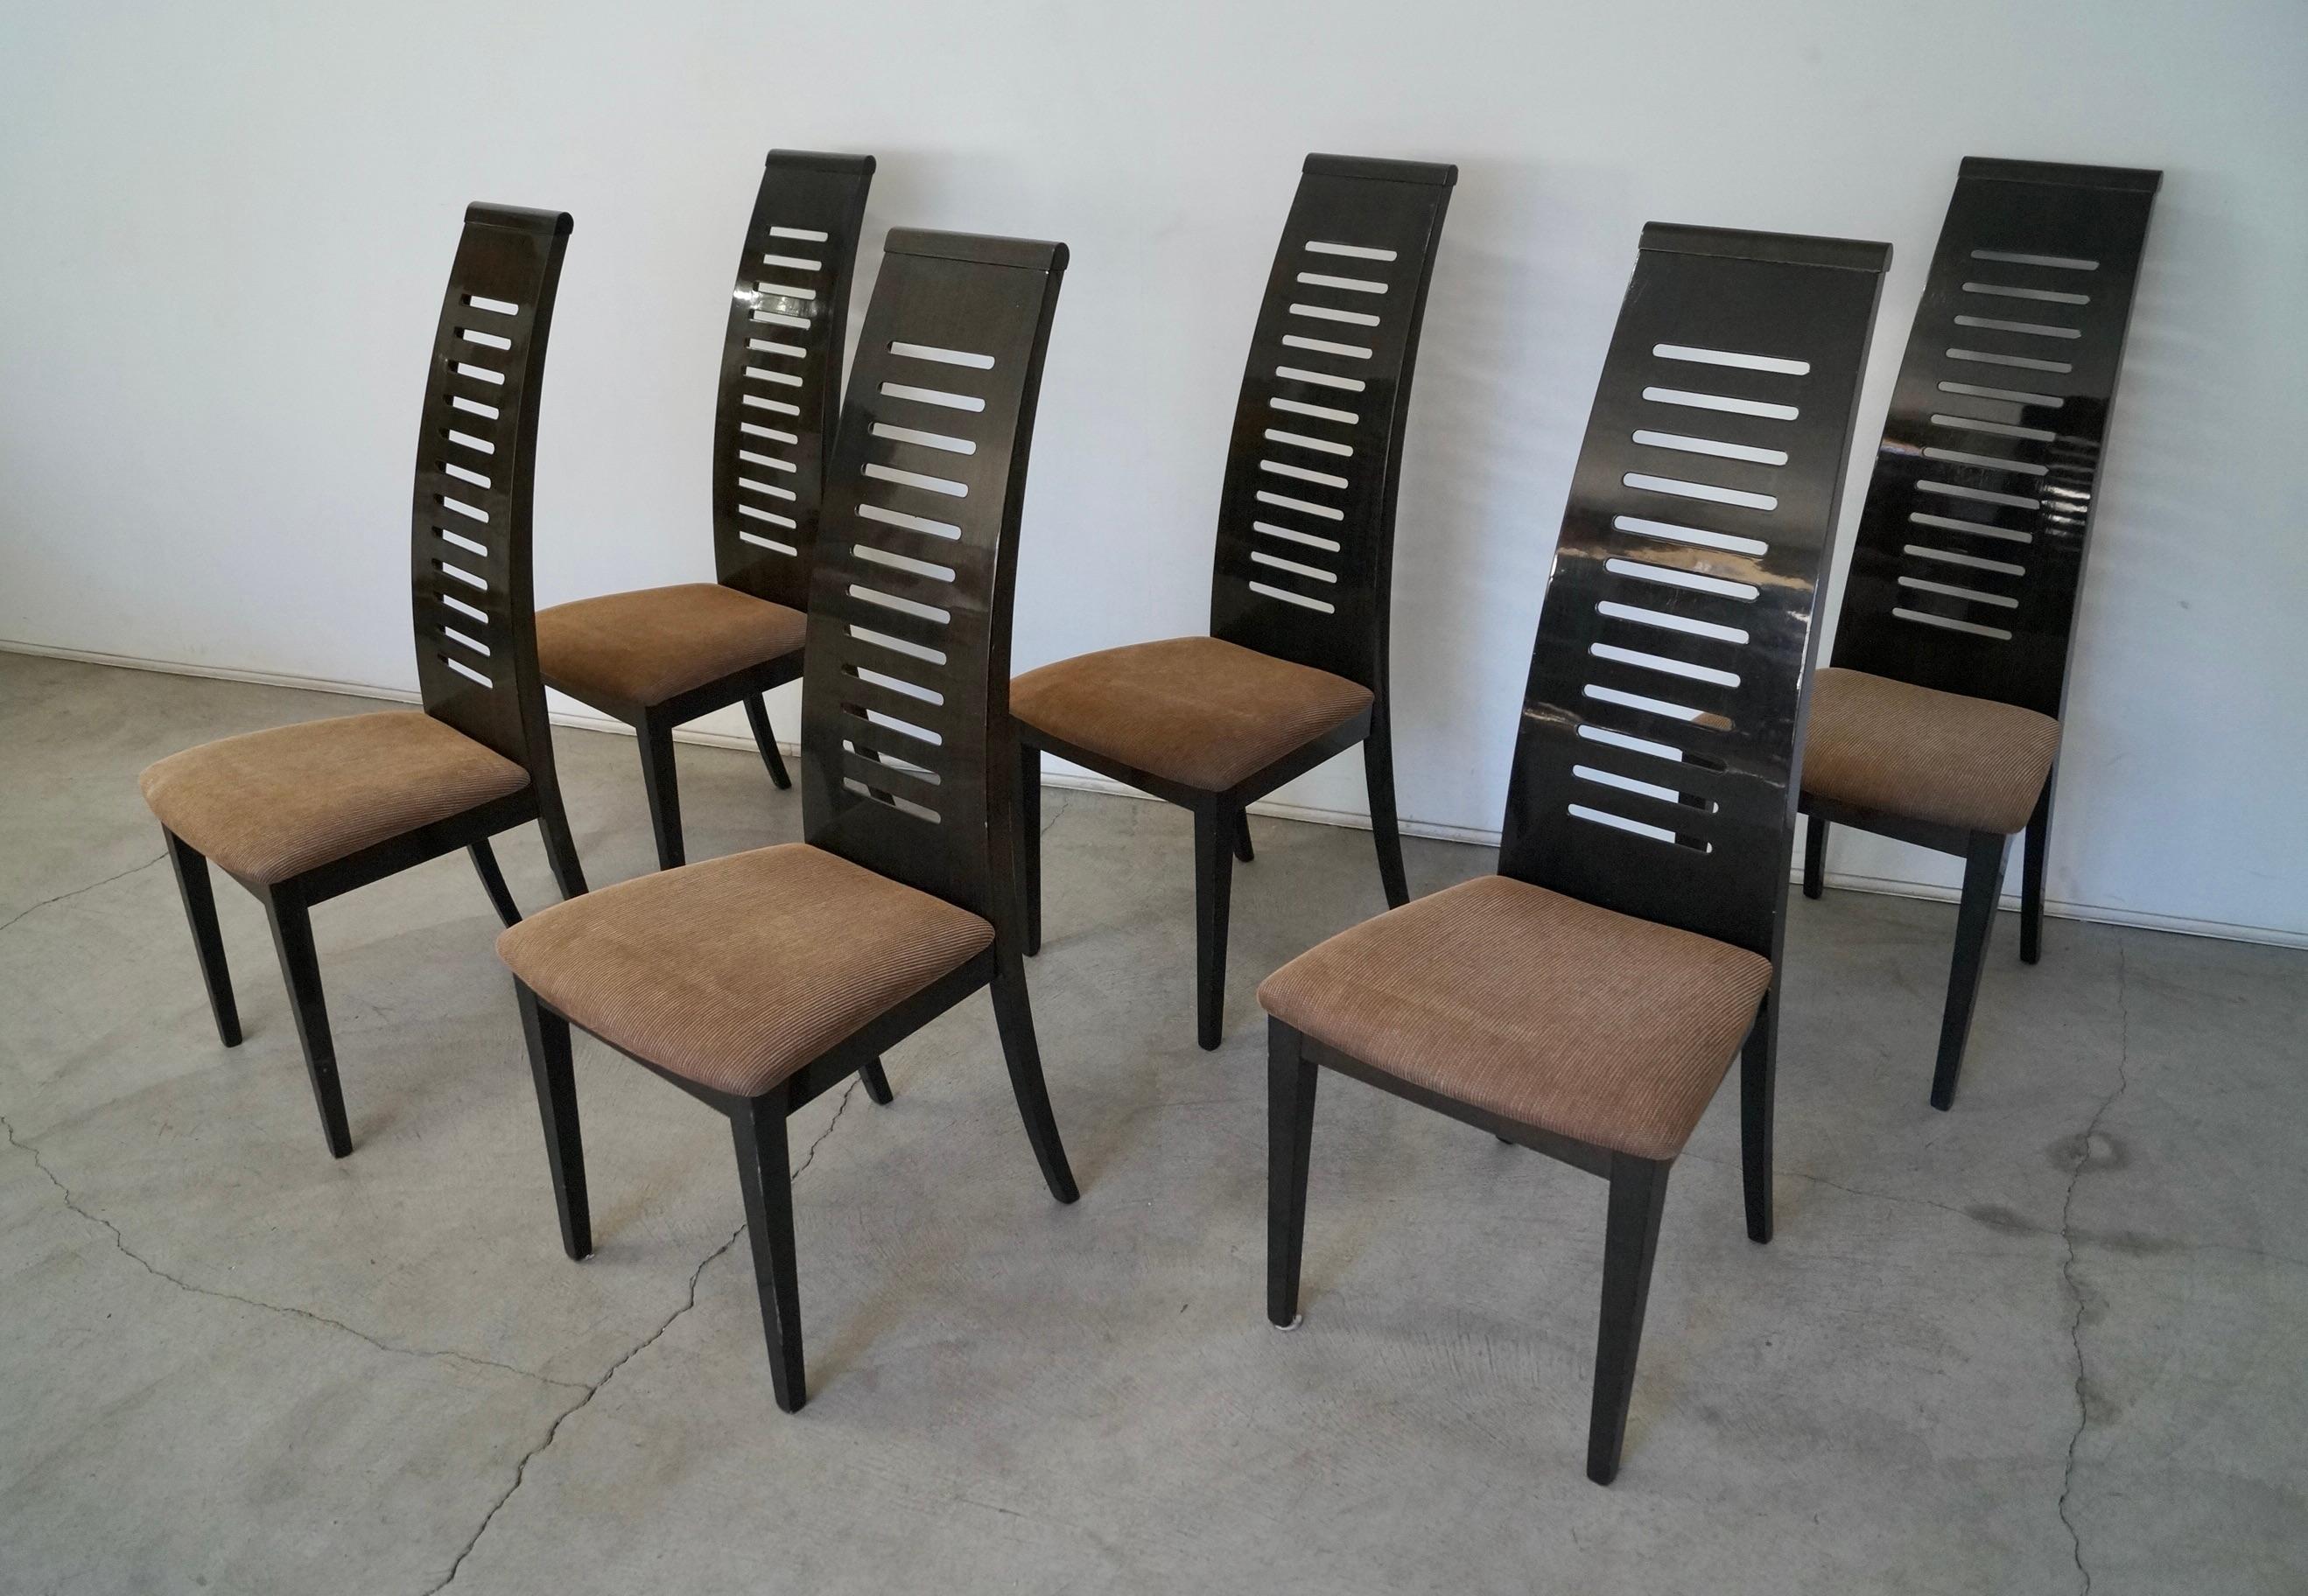 Postmodern Ello Furniture Pietro Costantini Dining Chairs - Set of 6 For Sale 1